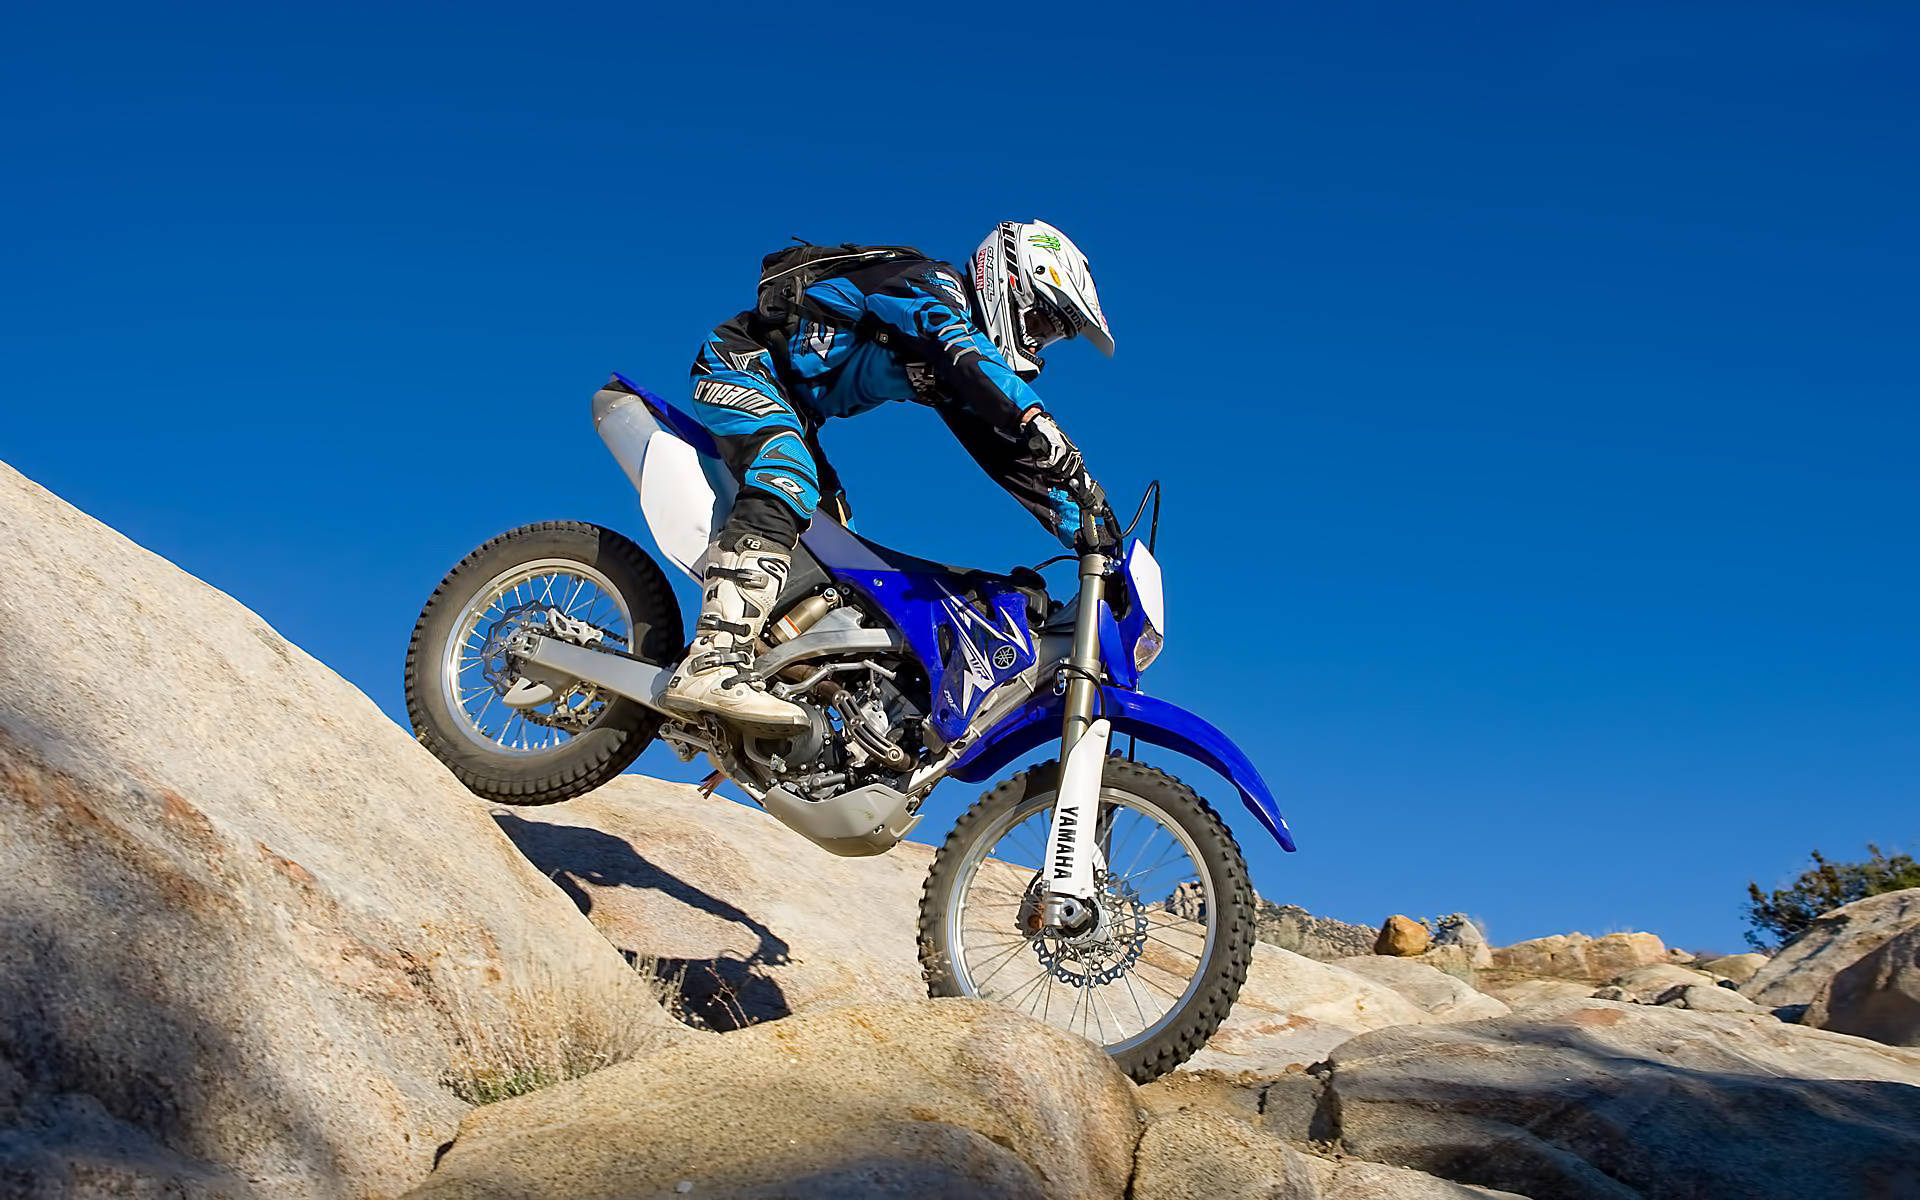 Extreme Motocross Rider In Rocky Scenery Background